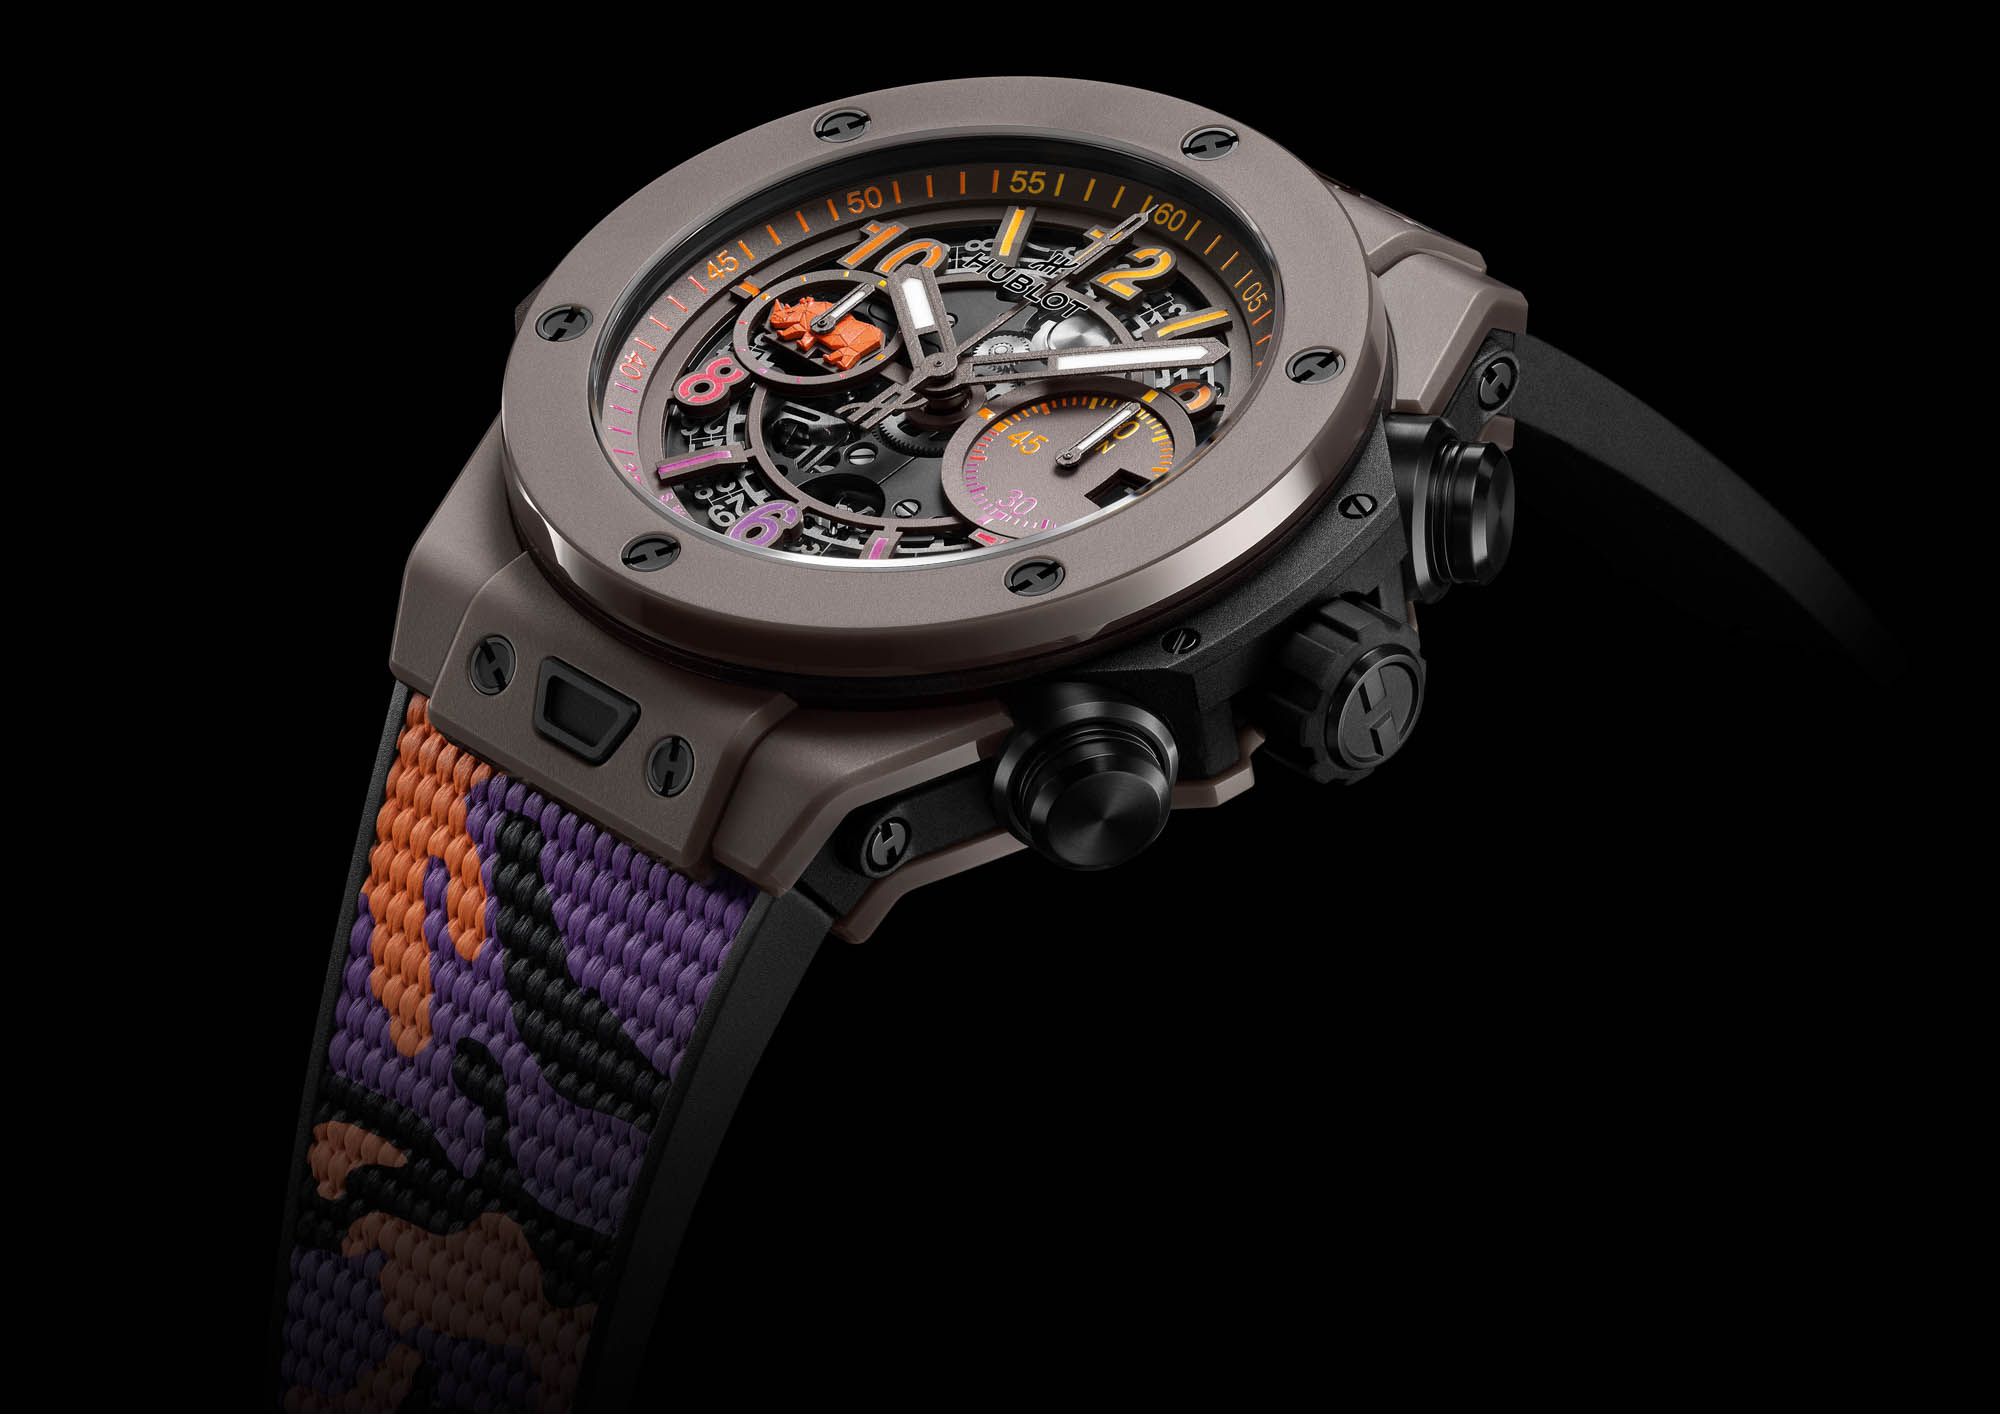 Hublot Releases New Unico SORAI Watch to Support Endangered Rhinos